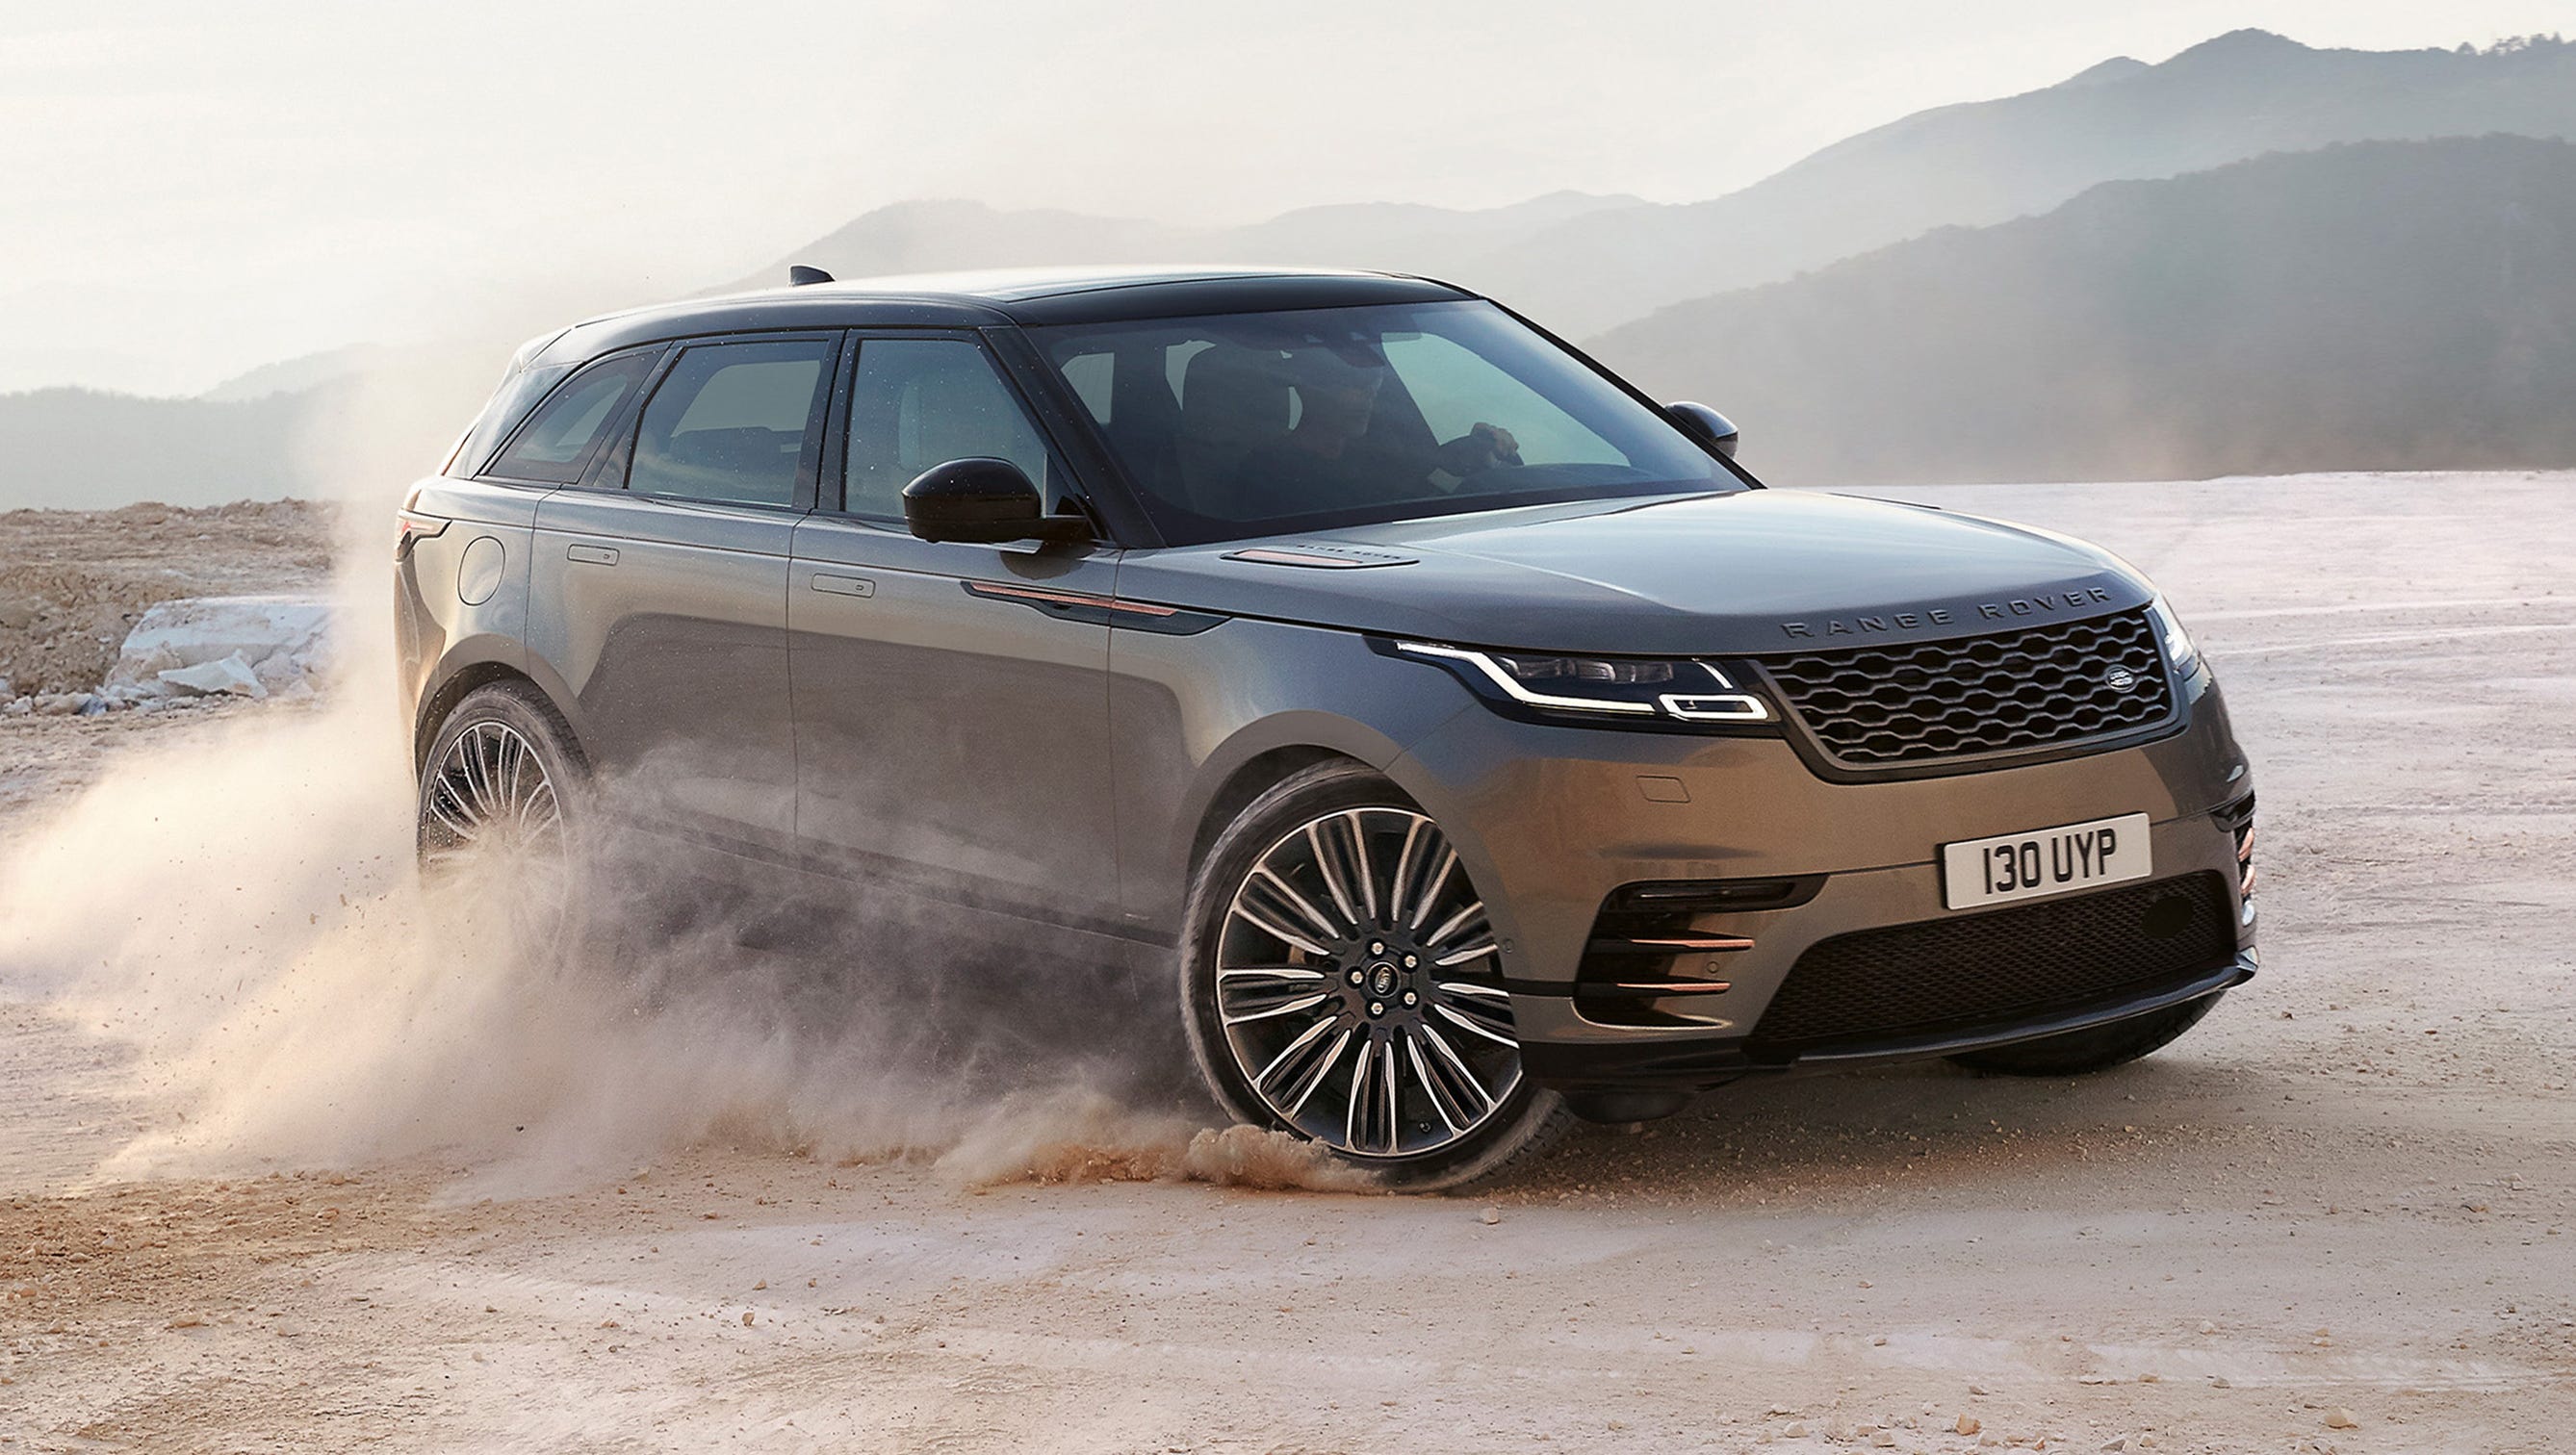 Review: 2018 Land Rover Velar sets new standards for SUV interiors